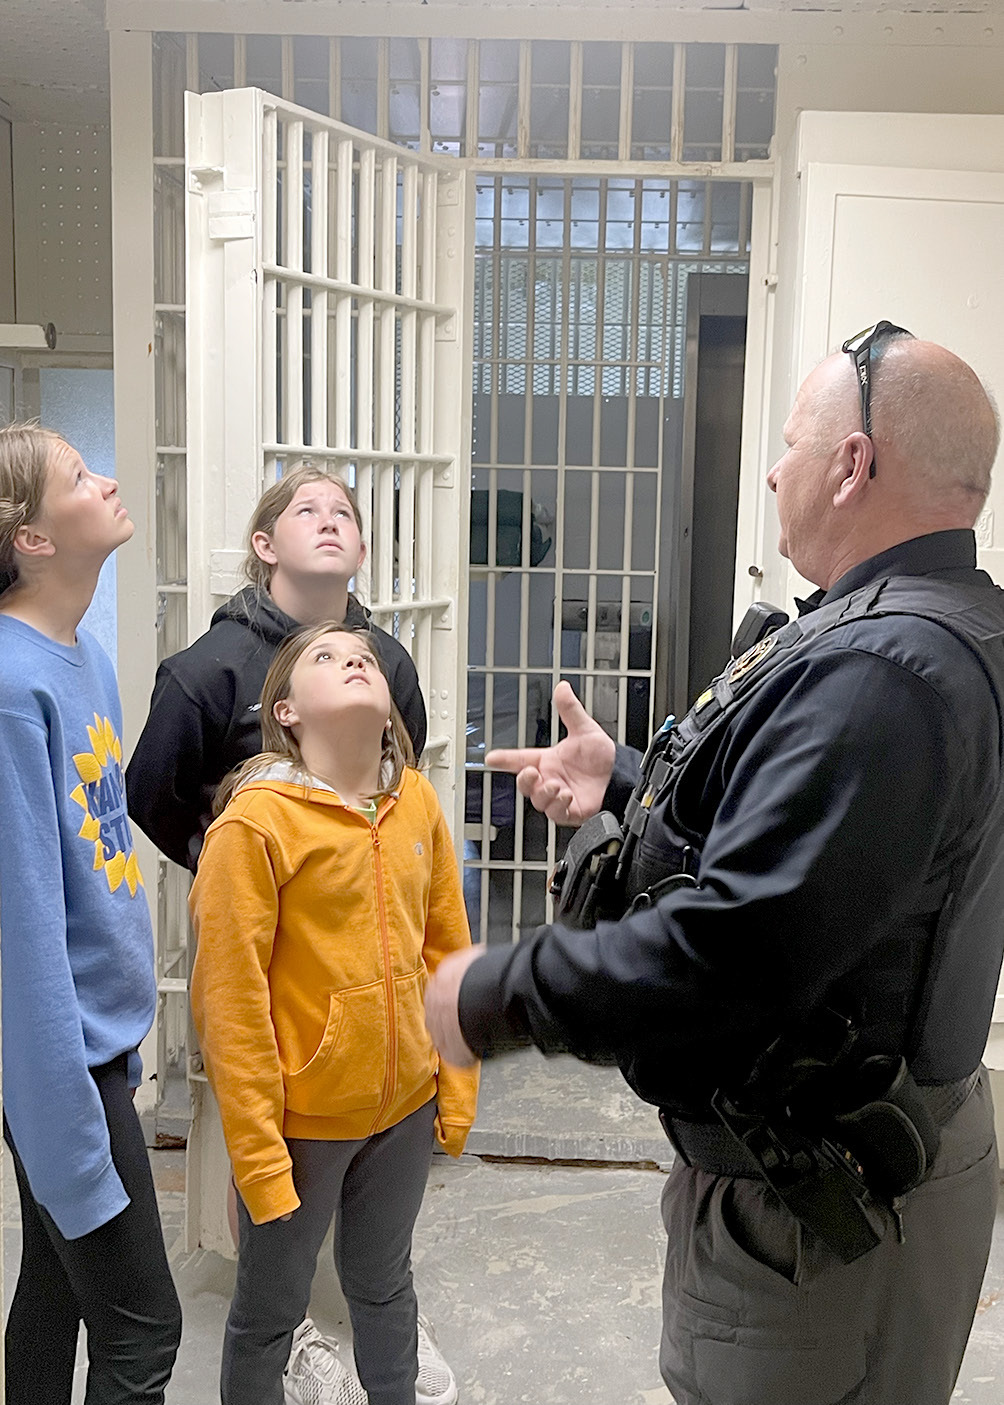 TEAGANN SHAMBURG, Jada Martin, and Serenity Carpenter listen to Lieutenant Collin Hockett talk about the Rooks County Jail, located on the fourth floor of the courthouse. It served the County for many decades, and was toured by many during the Centennial Celebration of the Rooks County Courthouse.